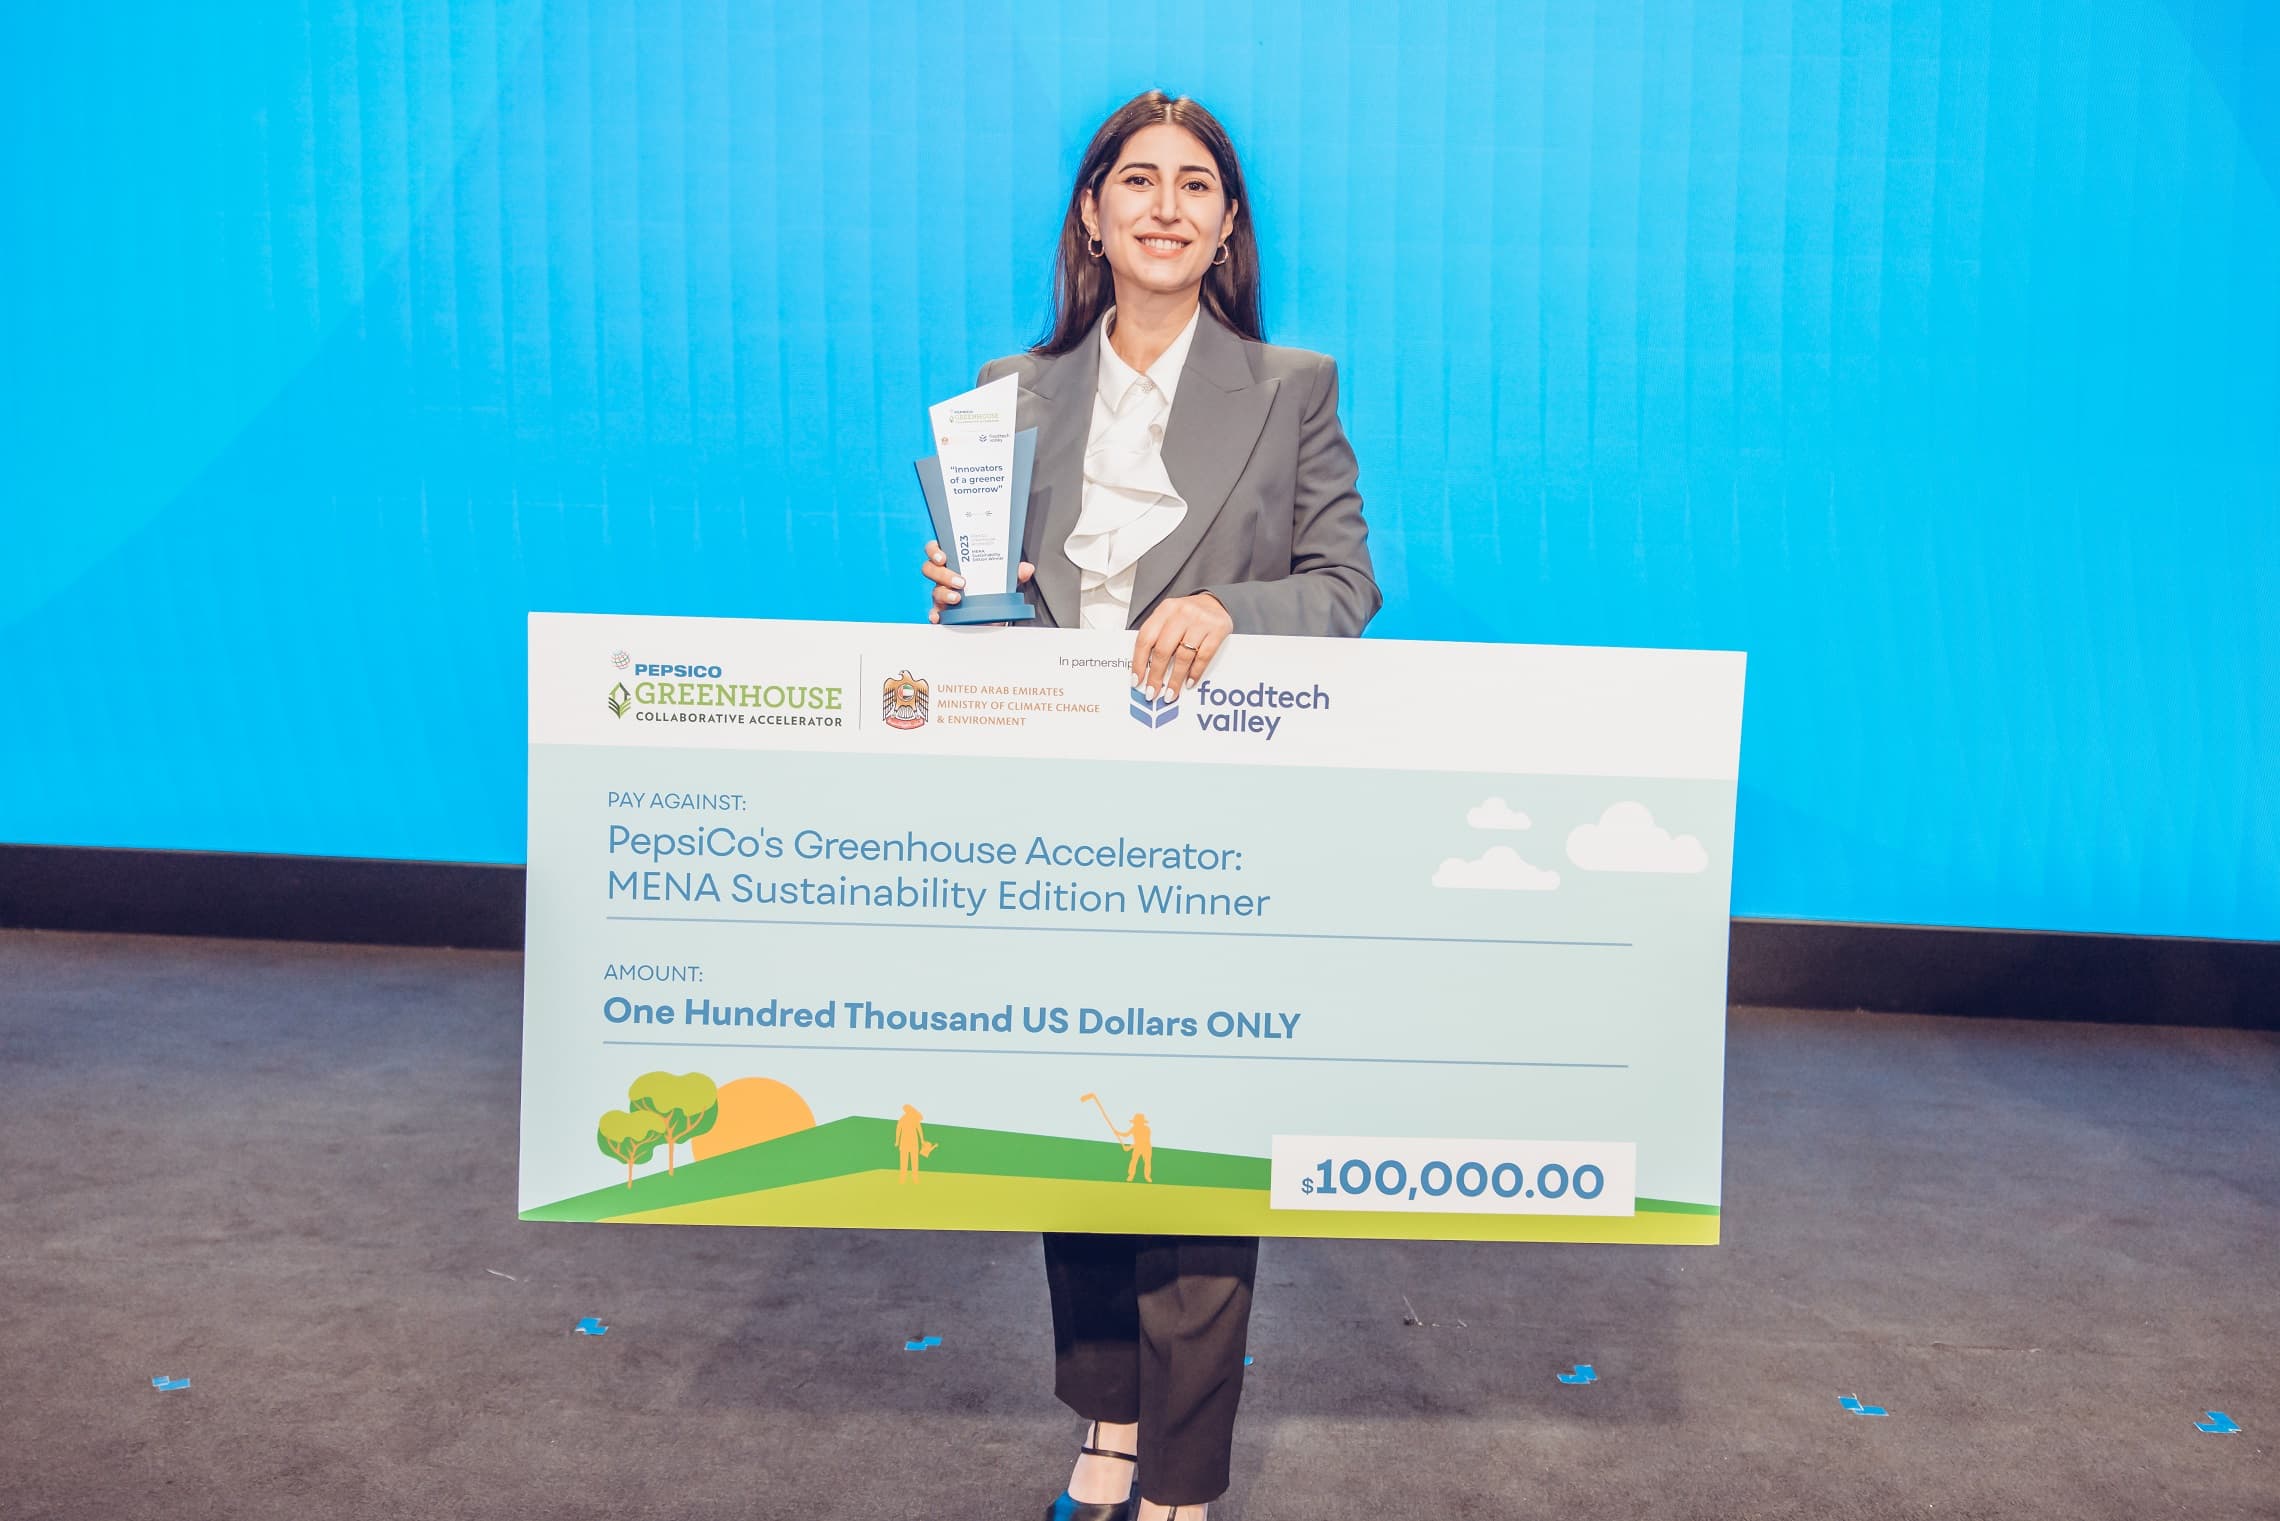 MENA START-UP DOODA SOLUTIONS RECEIVES $100,000 GRANT FROM PepsiCo TO SCALE SUSTAINABLE AGRICULTURAL SOLUTION